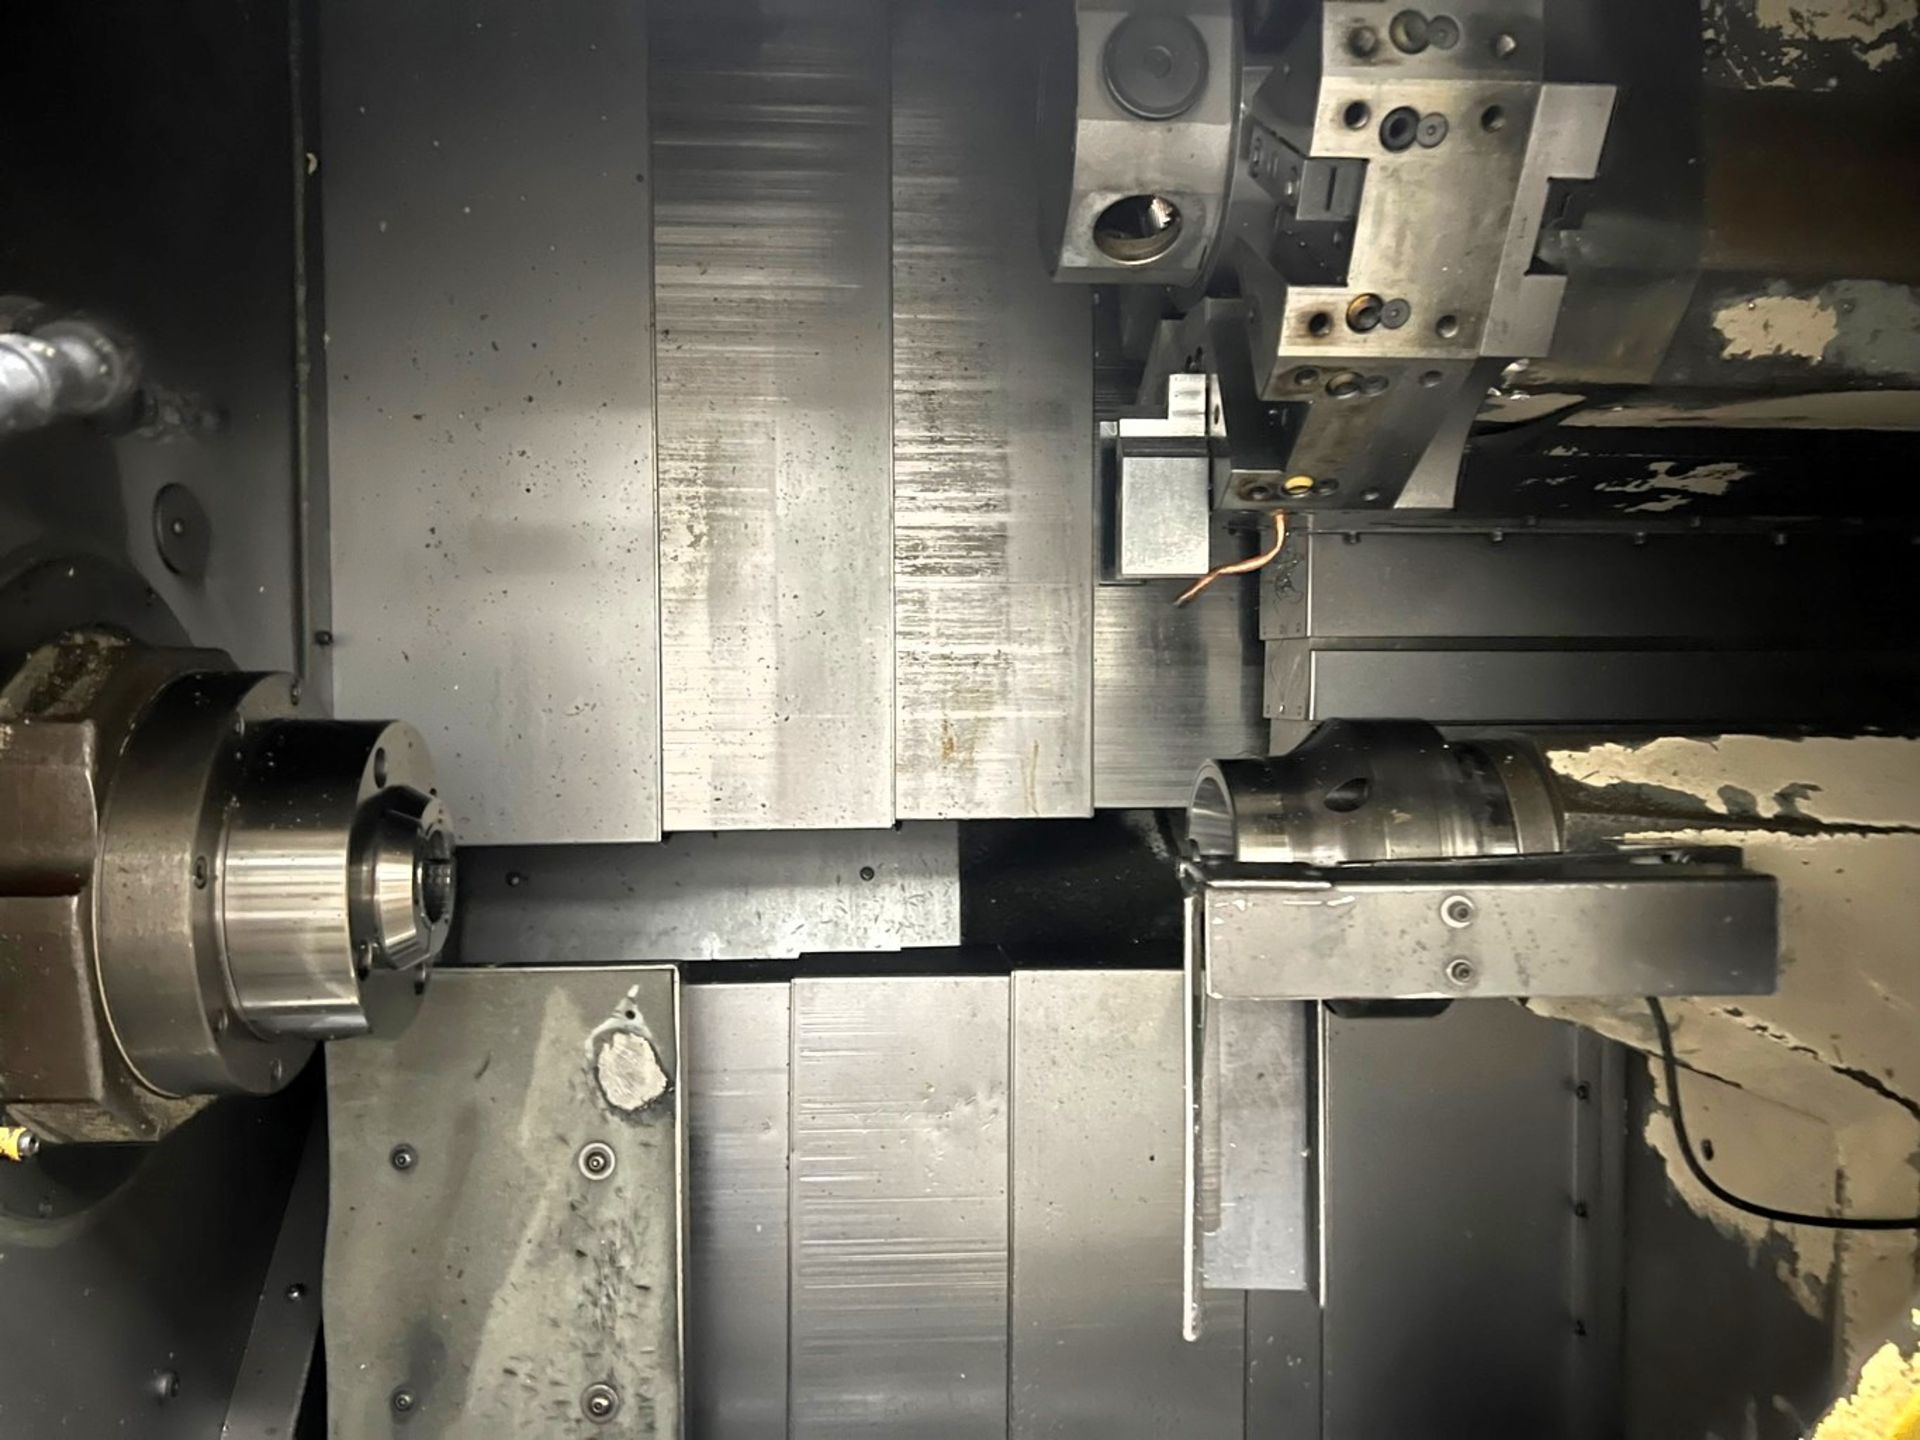 Hardinge Conquest 51 CNC Lathe with Live Milling, S/N CL-931-BC - Image 3 of 8